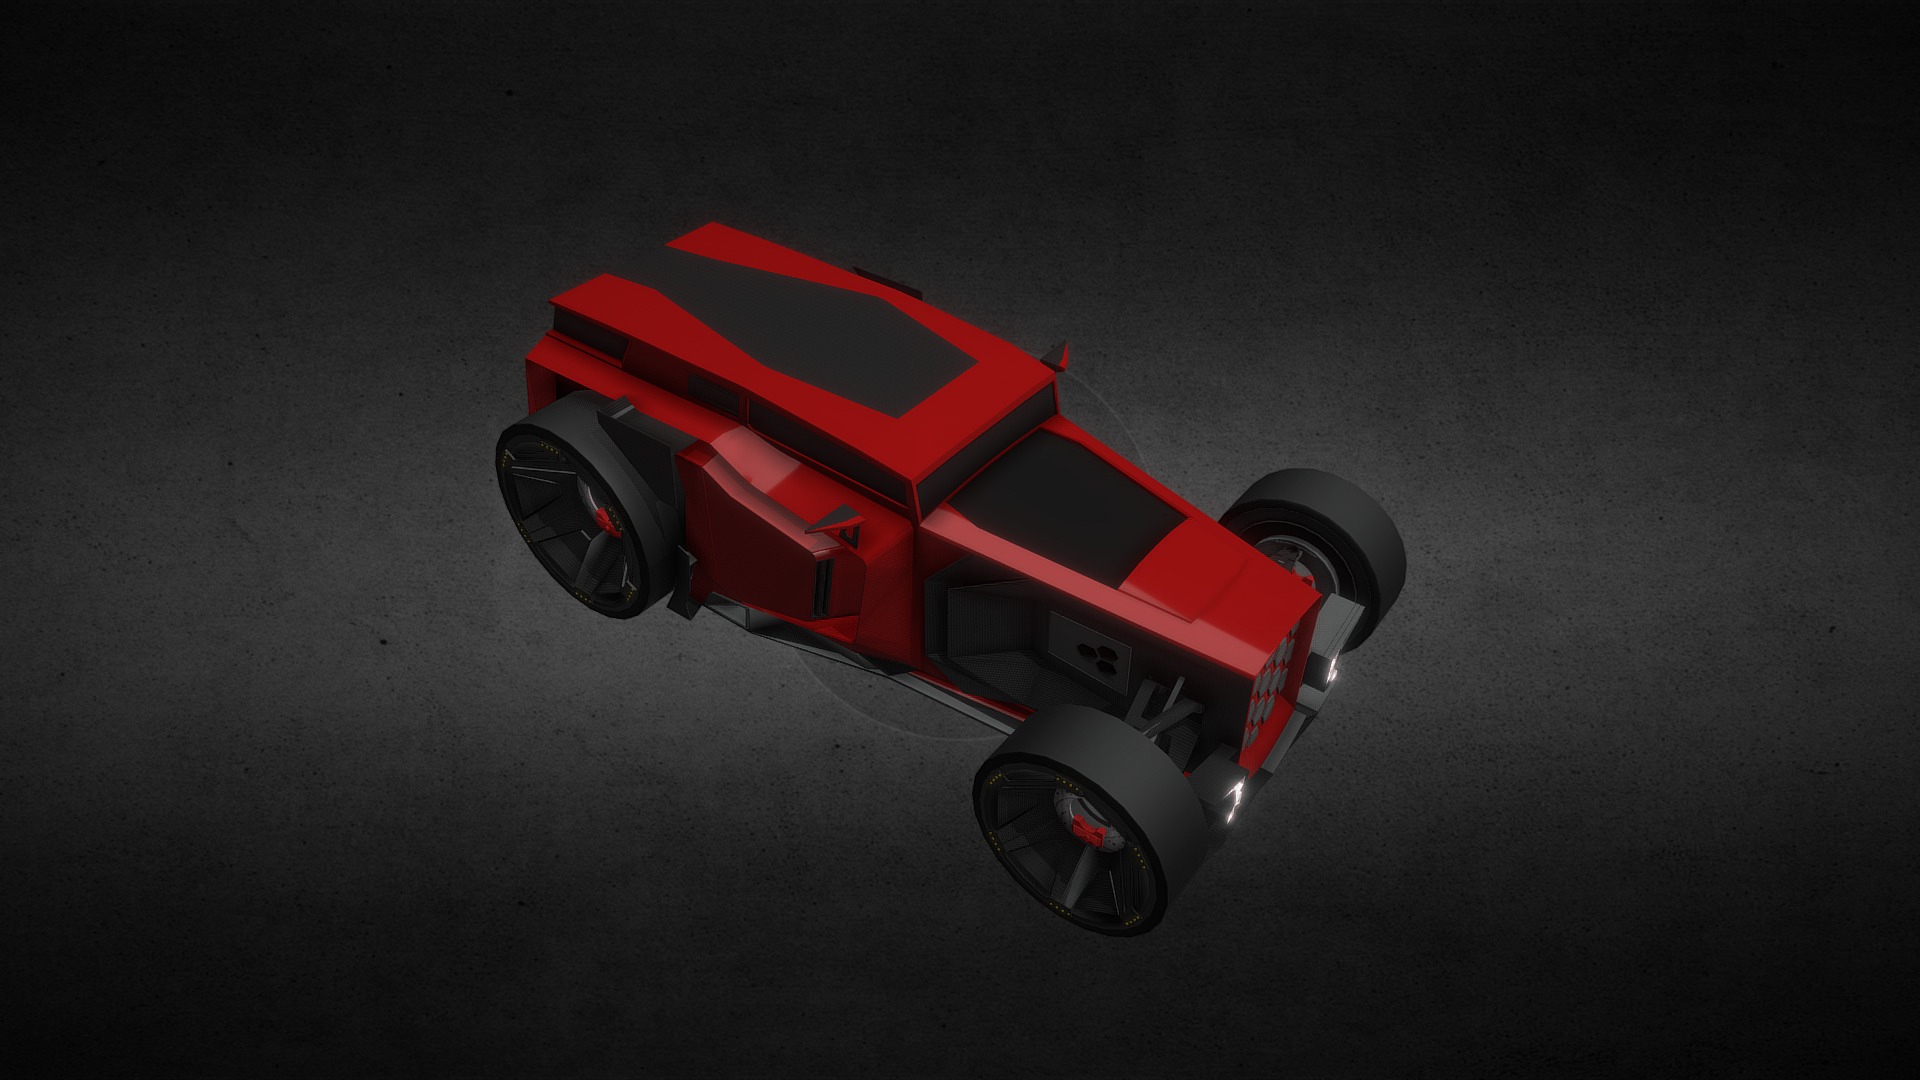 3D model Hot Rod Carbon (Game car) - This is a 3D model of the Hot Rod Carbon (Game car). The 3D model is about a red and black toy car.